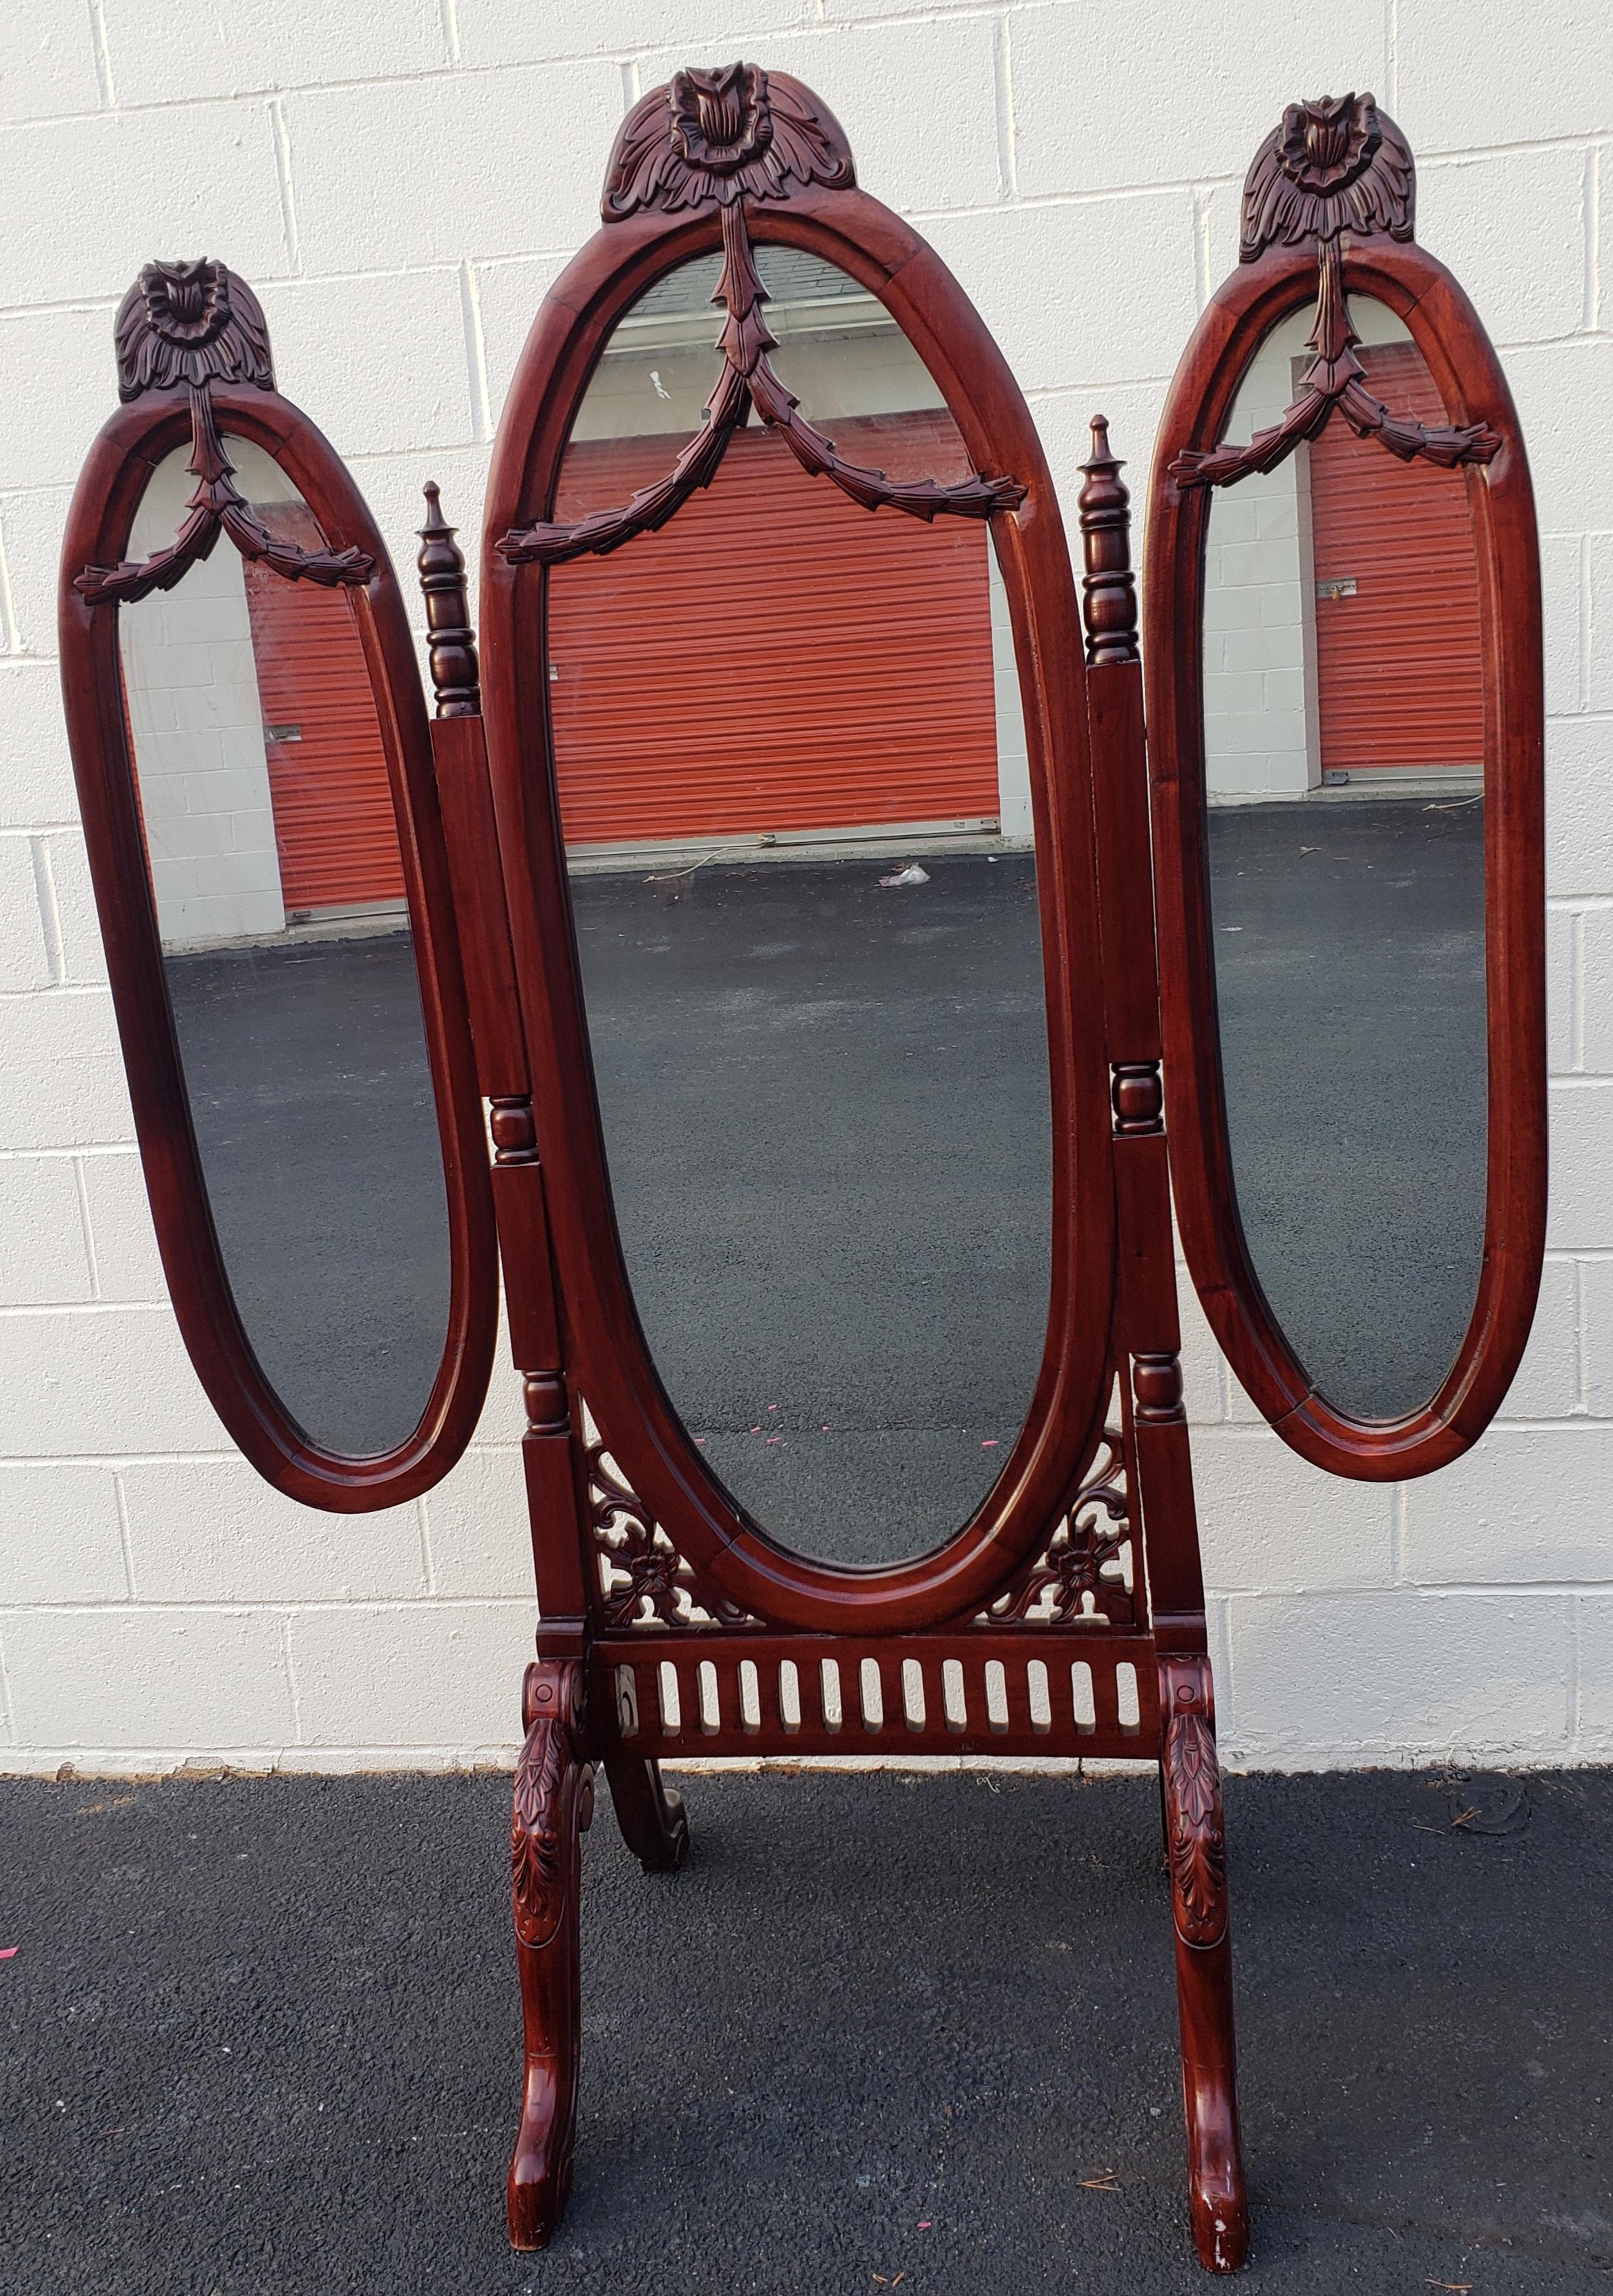 This tri-fold mirror features beautiful mahogany wood carvings. The mirror is self standing and very steady with the large base. The left and right mirror swing out from the center.
The mirror set is 51